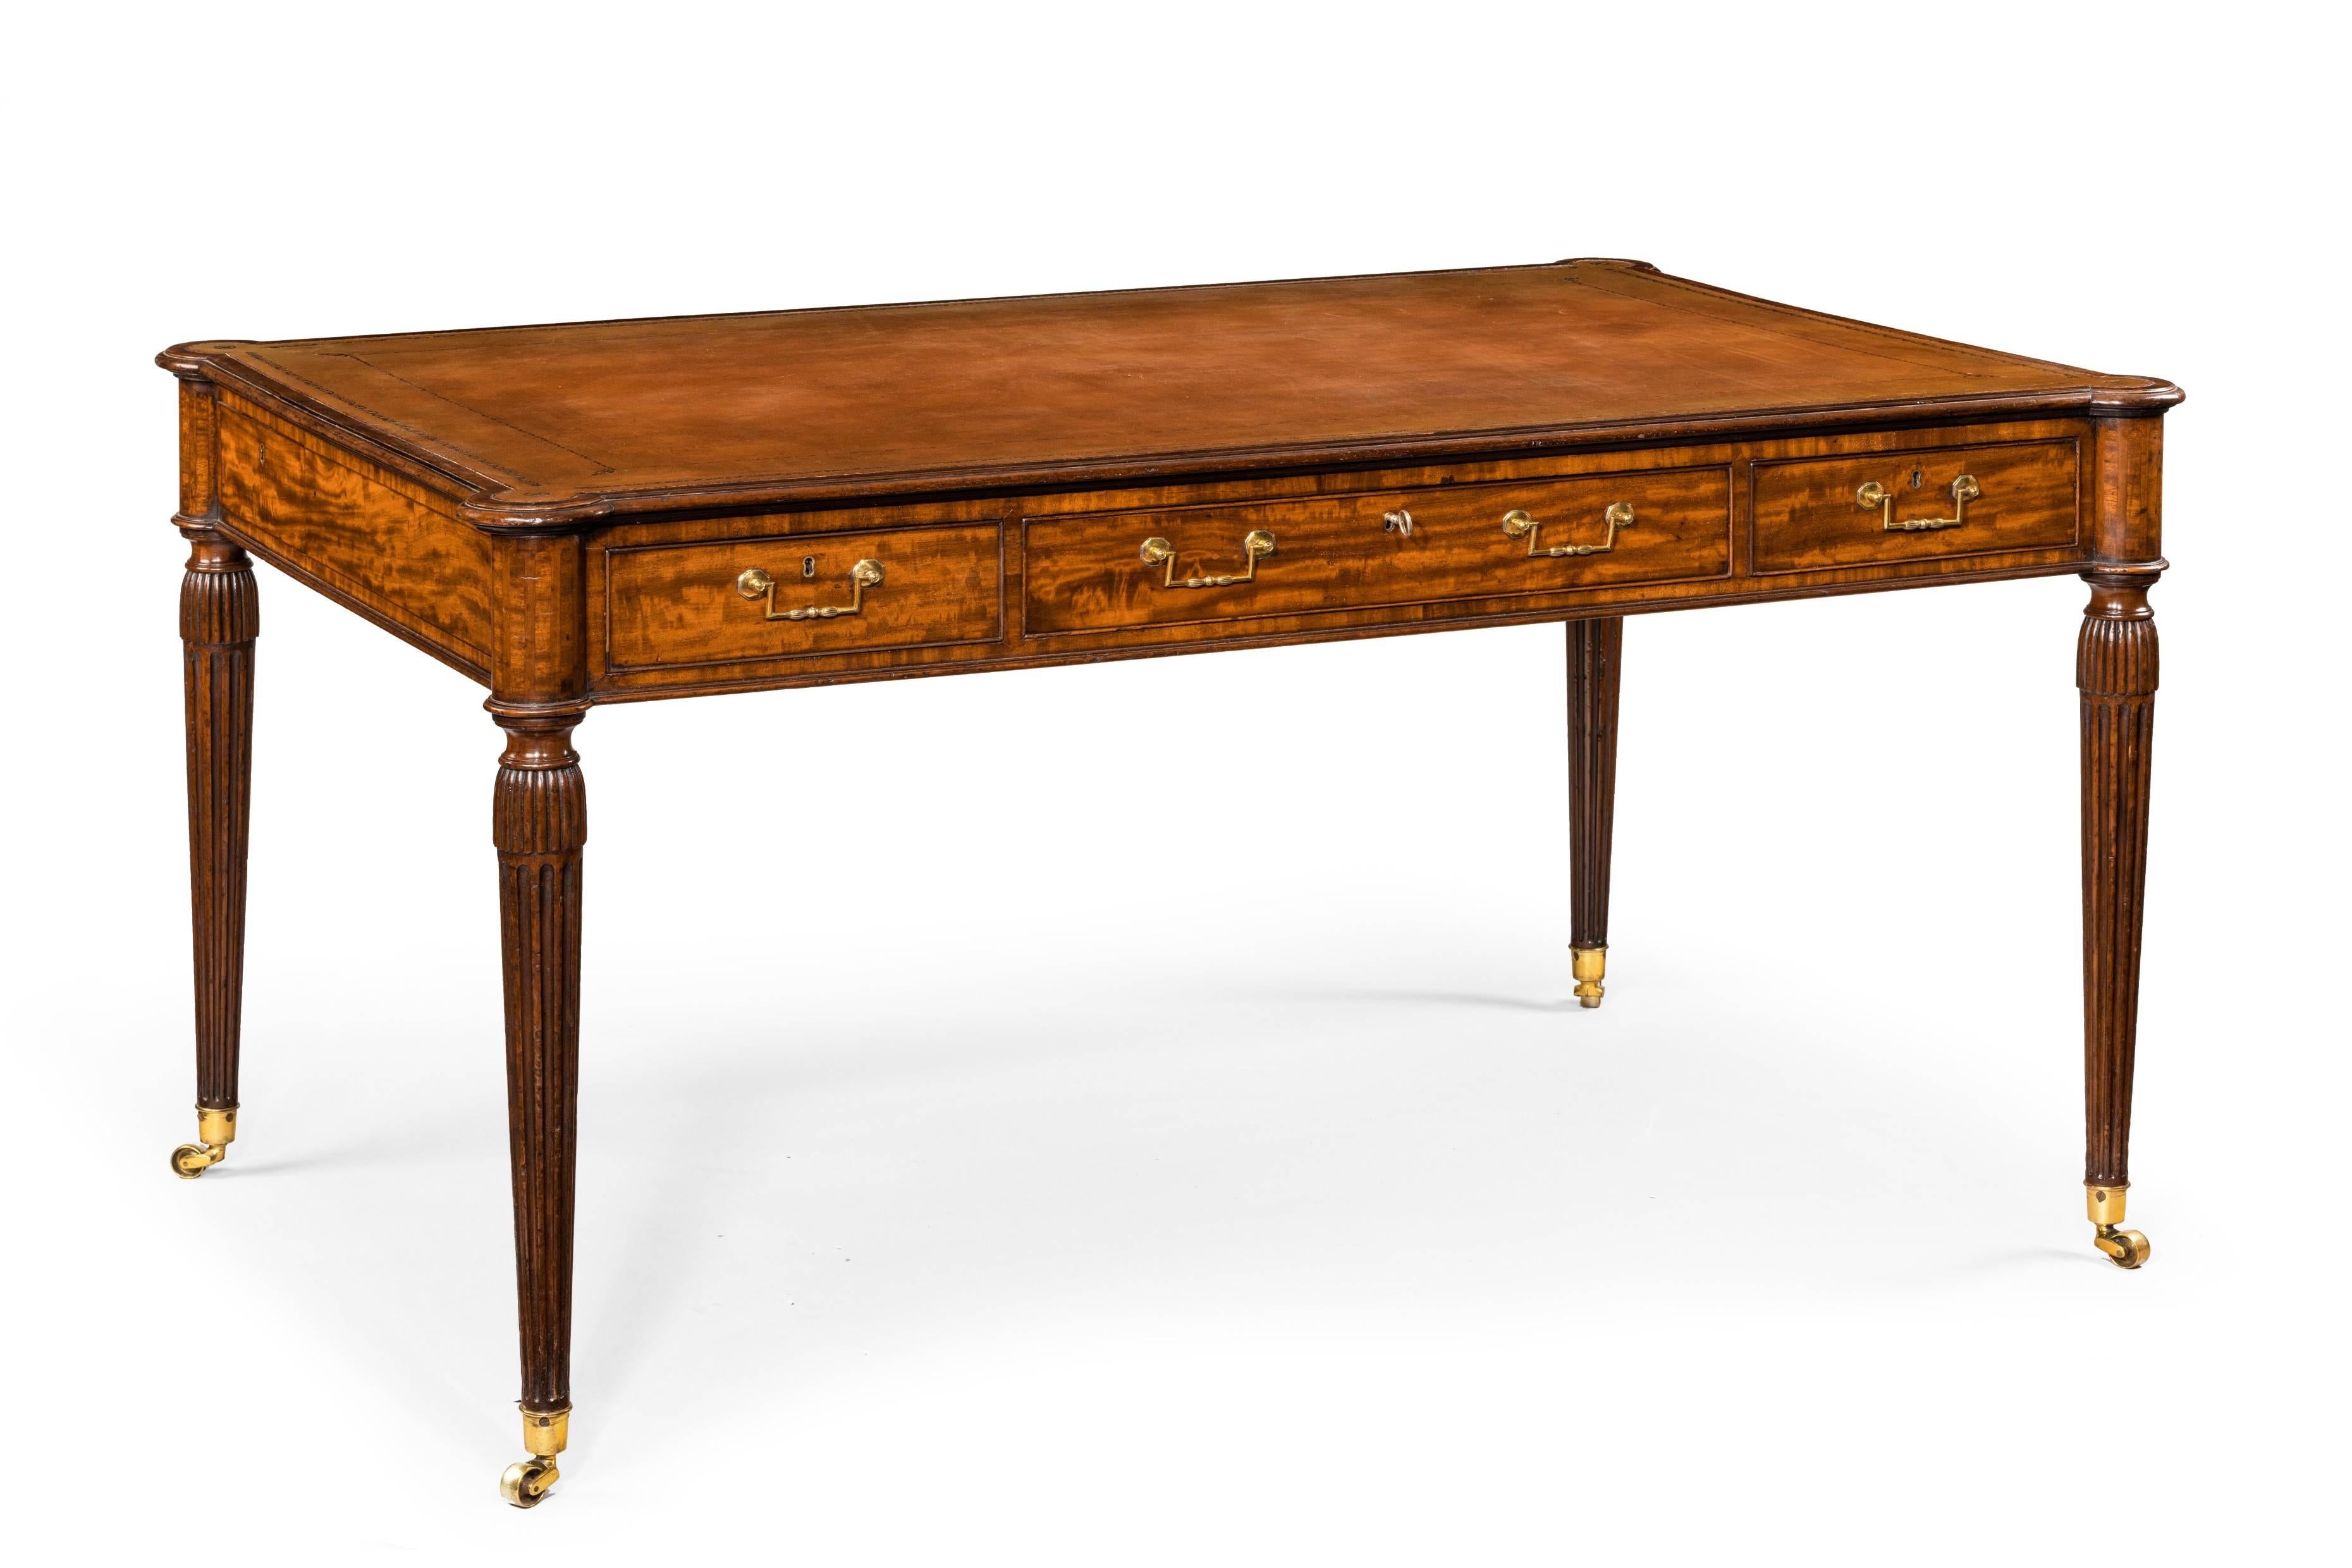 An elegant Sheraton period mahogany free standing writing table. Rectangular top with rounded projected corners. Turned tapering fluted legs topped with 'tassels'. Three mahogany lined frieze drawers with later brass handles. 
The whole is very much